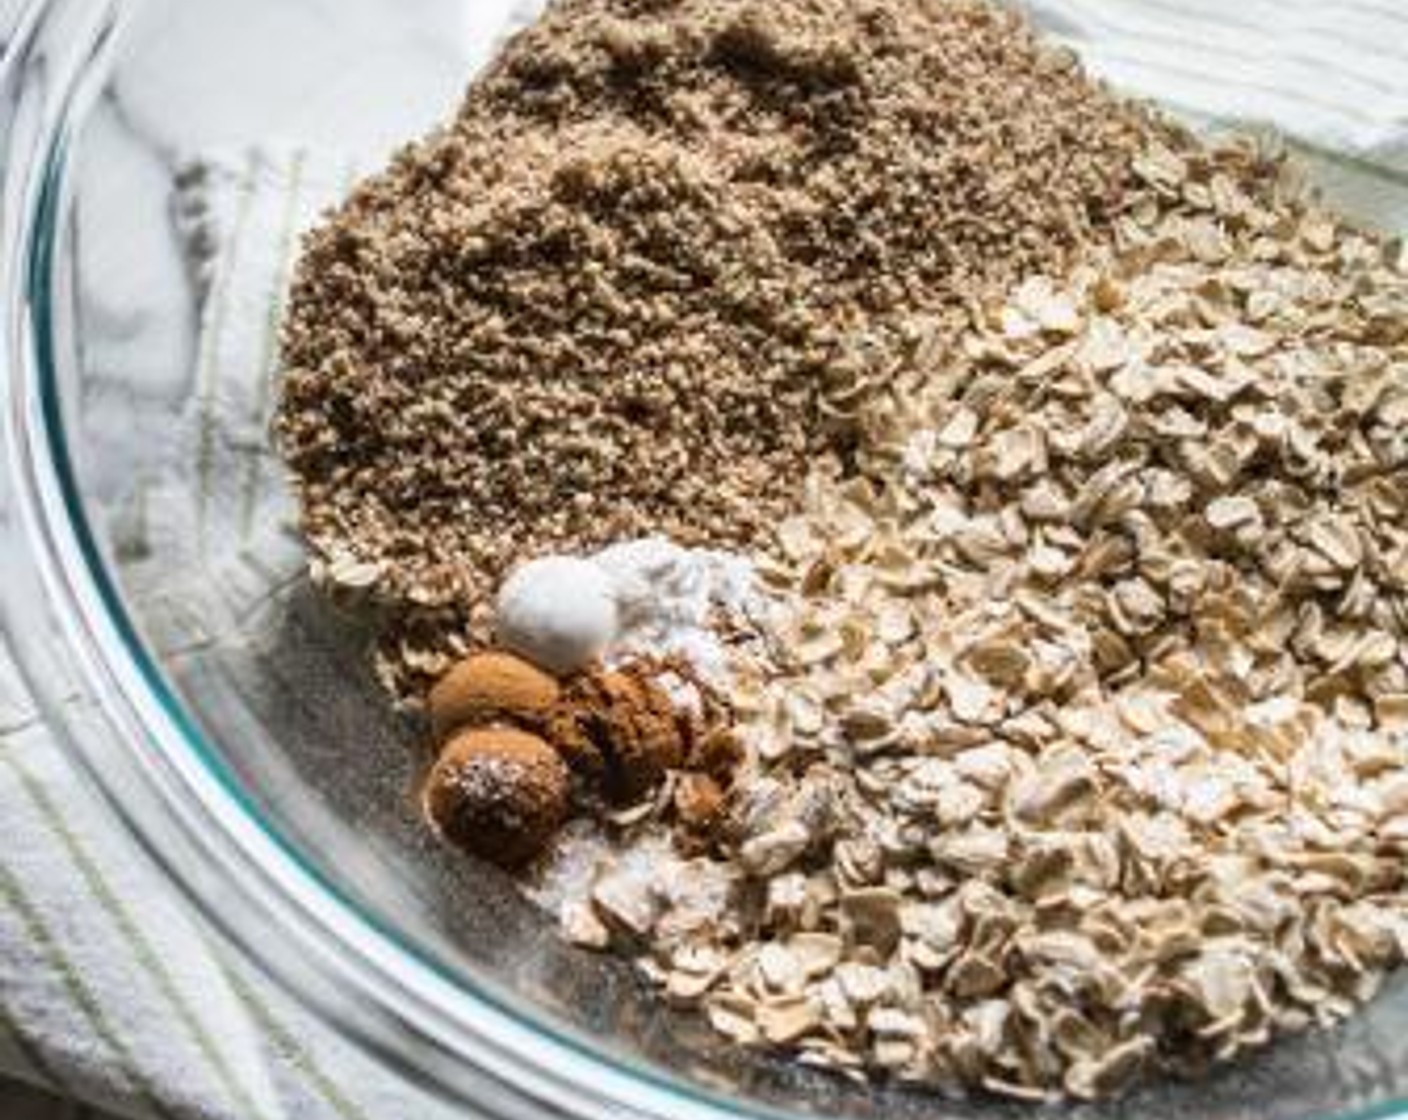 step 3 Add Old Fashioned Rolled Oats (3 cups), Pecan Meal (3/4 cup), Baking Powder (1 tsp), Ground Cinnamon (1/2 Tbsp), and Sea Salt (1/8 tsp) into a large bowl, stir to combine.